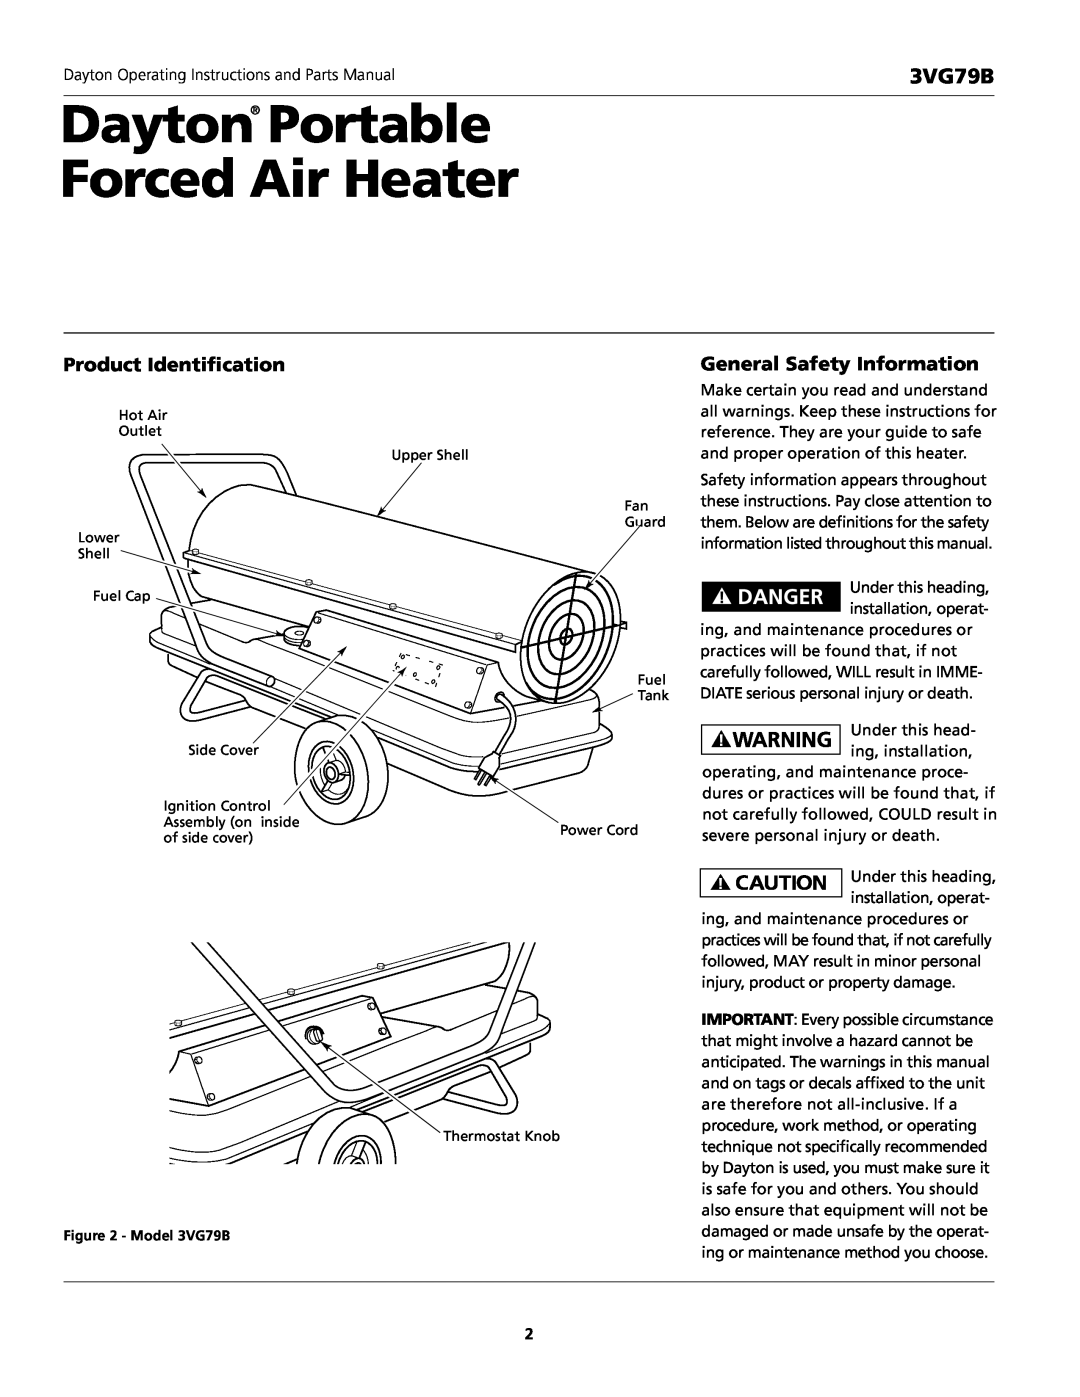 Dayton 3VG79B operating instructions Dayton Portable Forced Air Heater, Product Identification, General Safety Information 